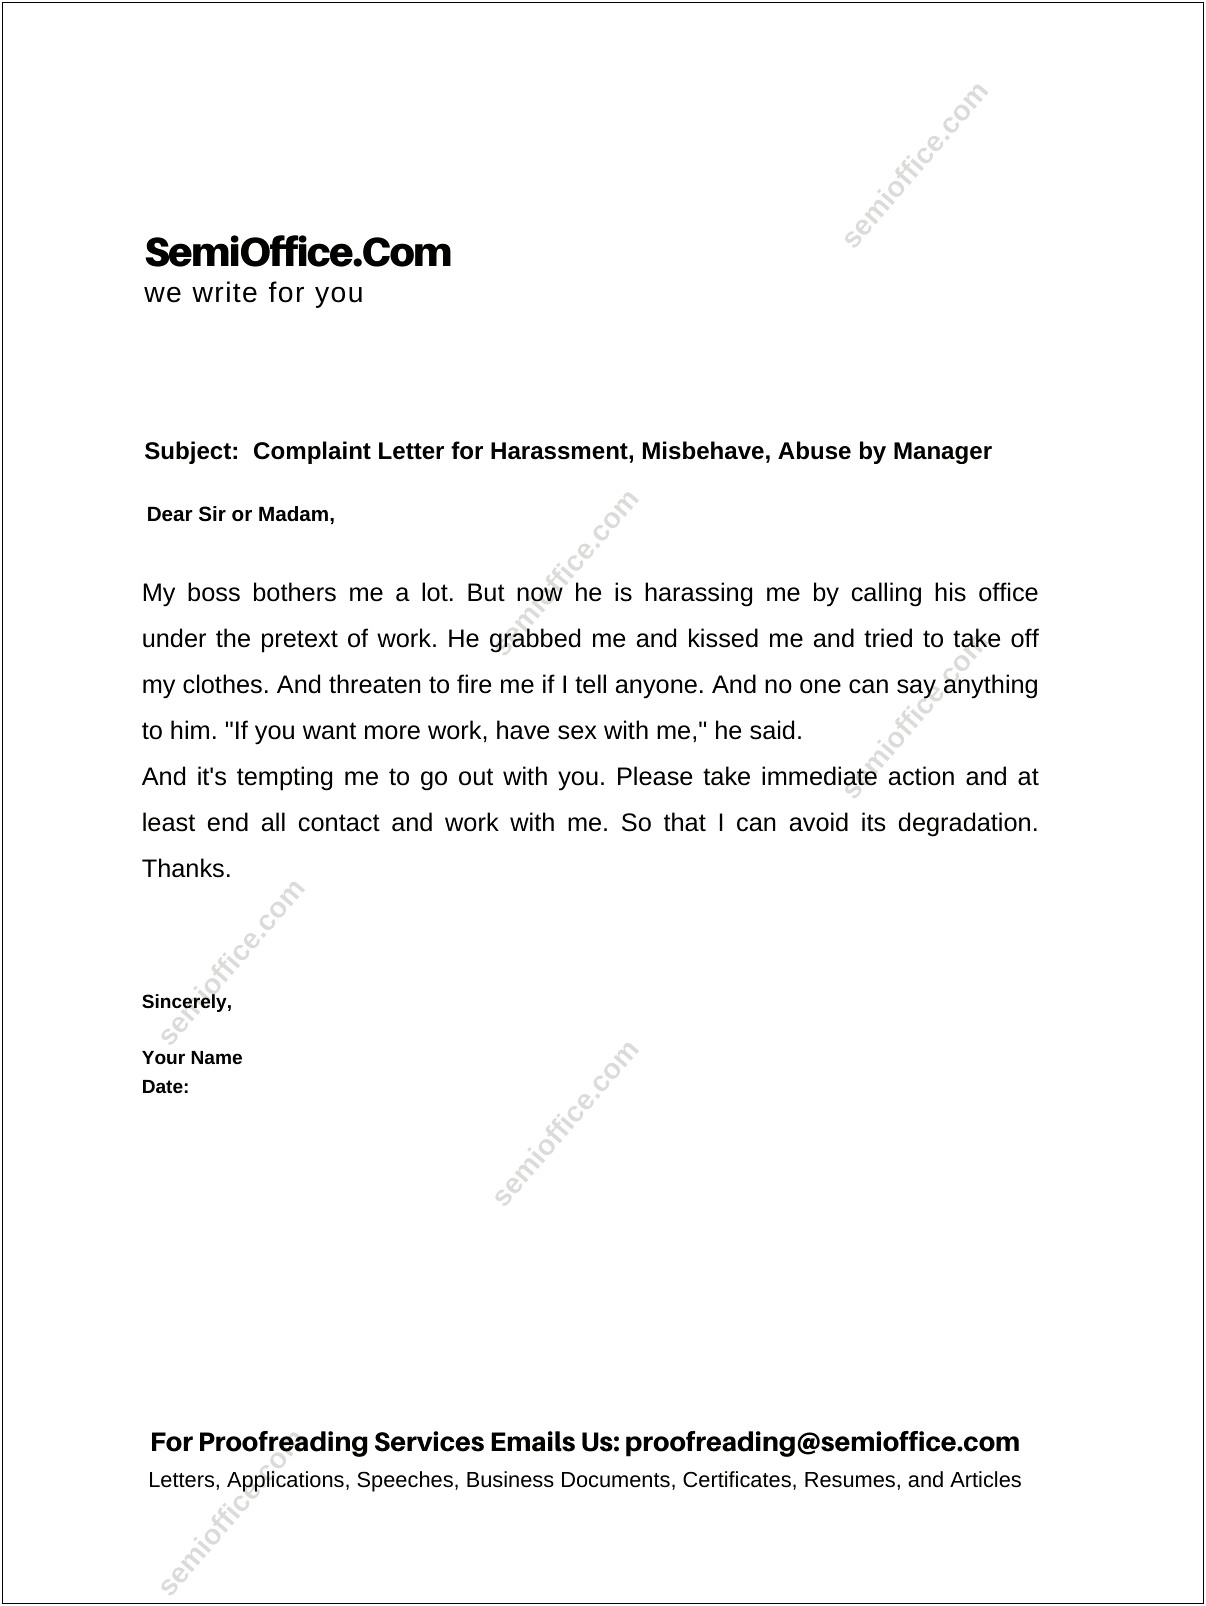 Formal Complaint Letter Template Workplace Bullying